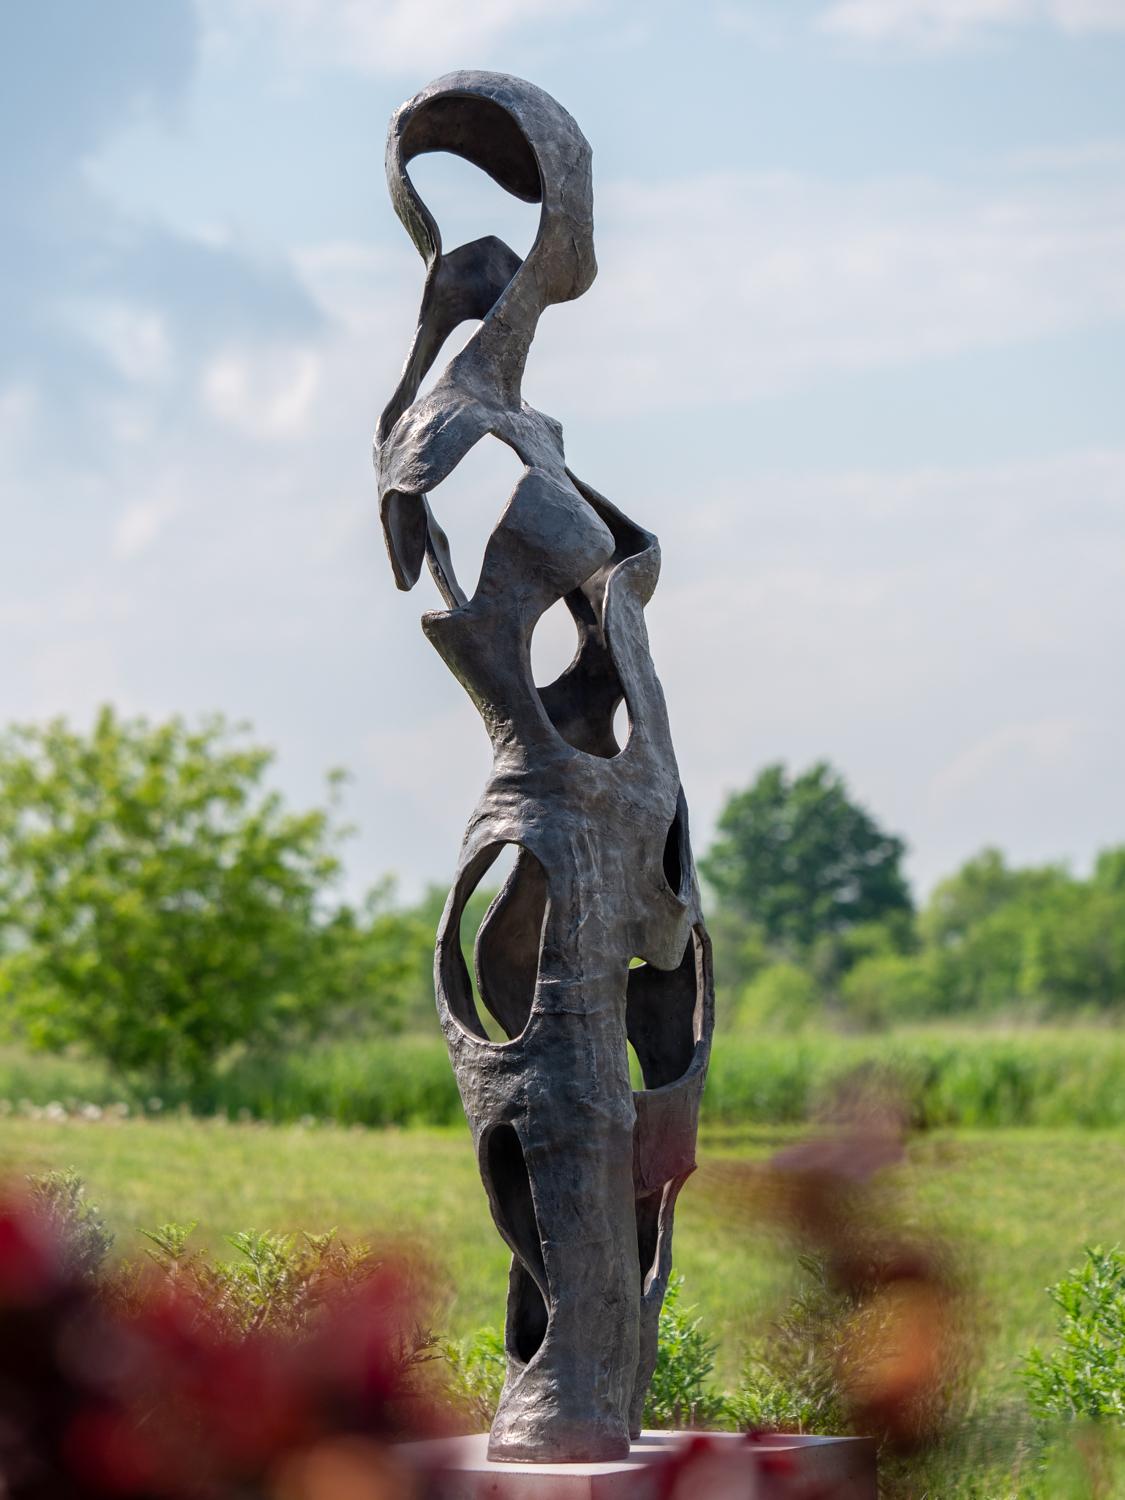 David Fisher Figurative Sculpture - V_N_S Edition 4/9 - tall, abstracted, figurative female bronze outdoor sculpture